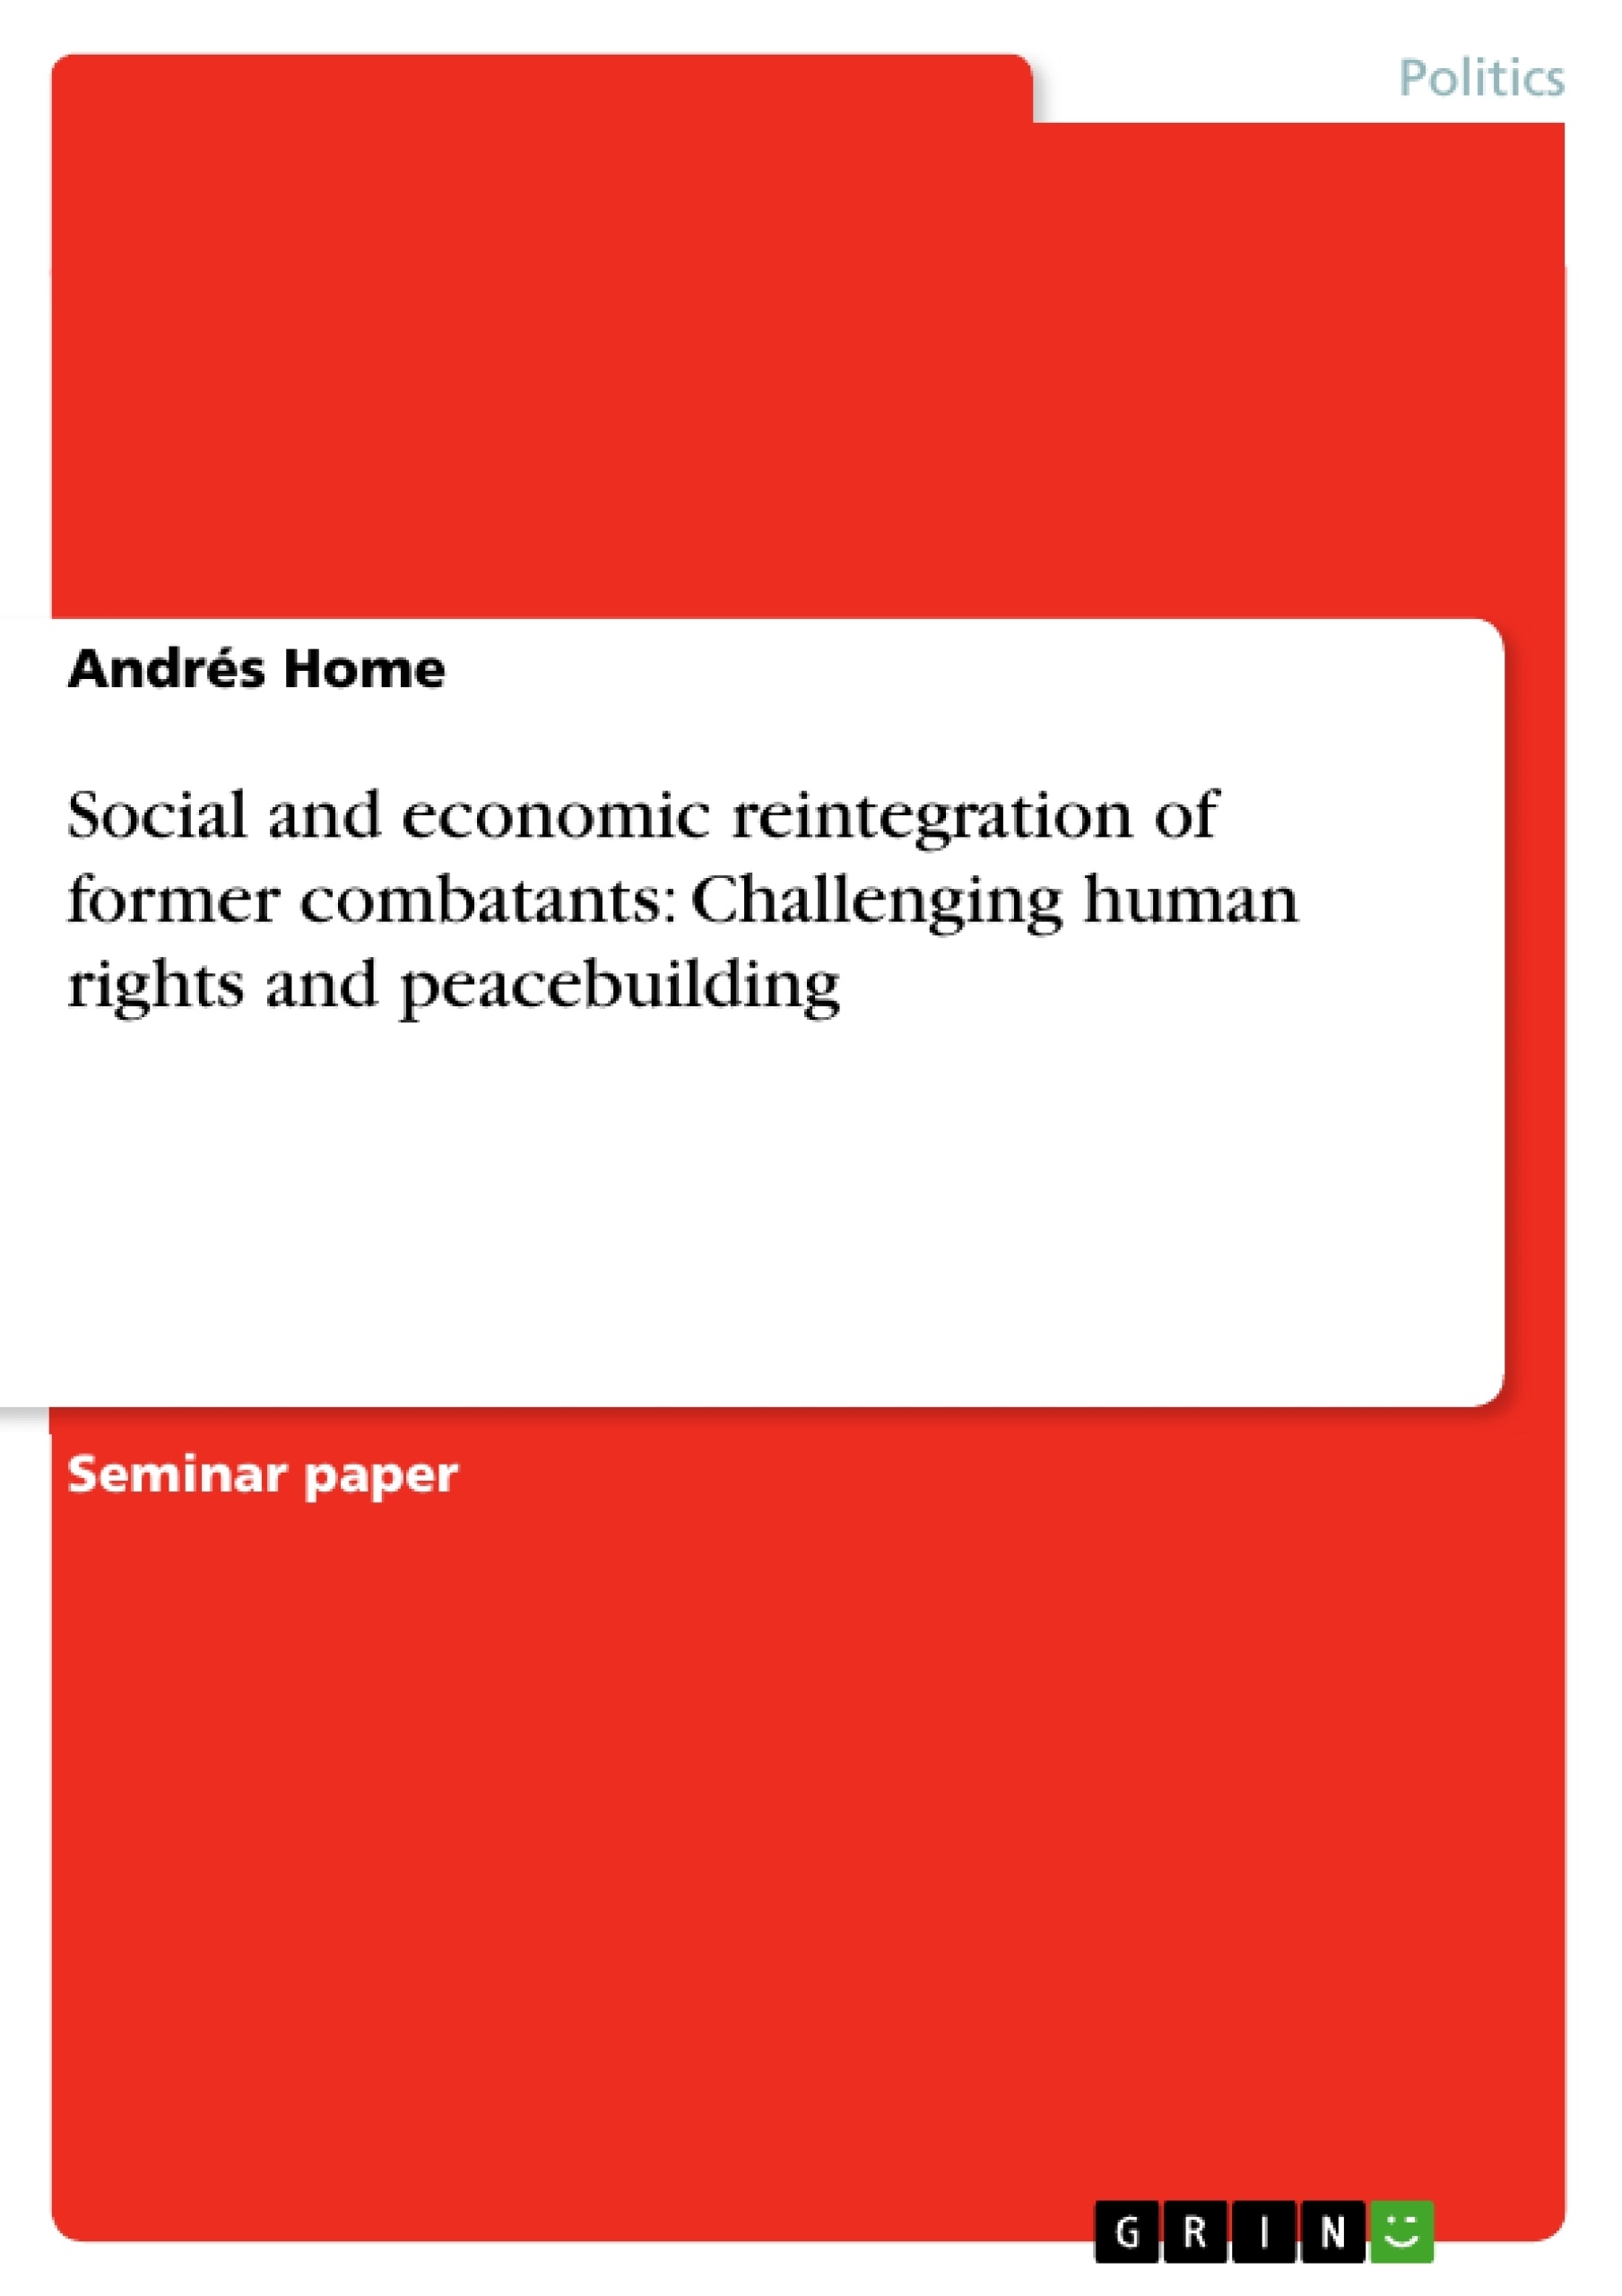 Titel: Social and economic reintegration of former combatants: Challenging human rights and peacebuilding